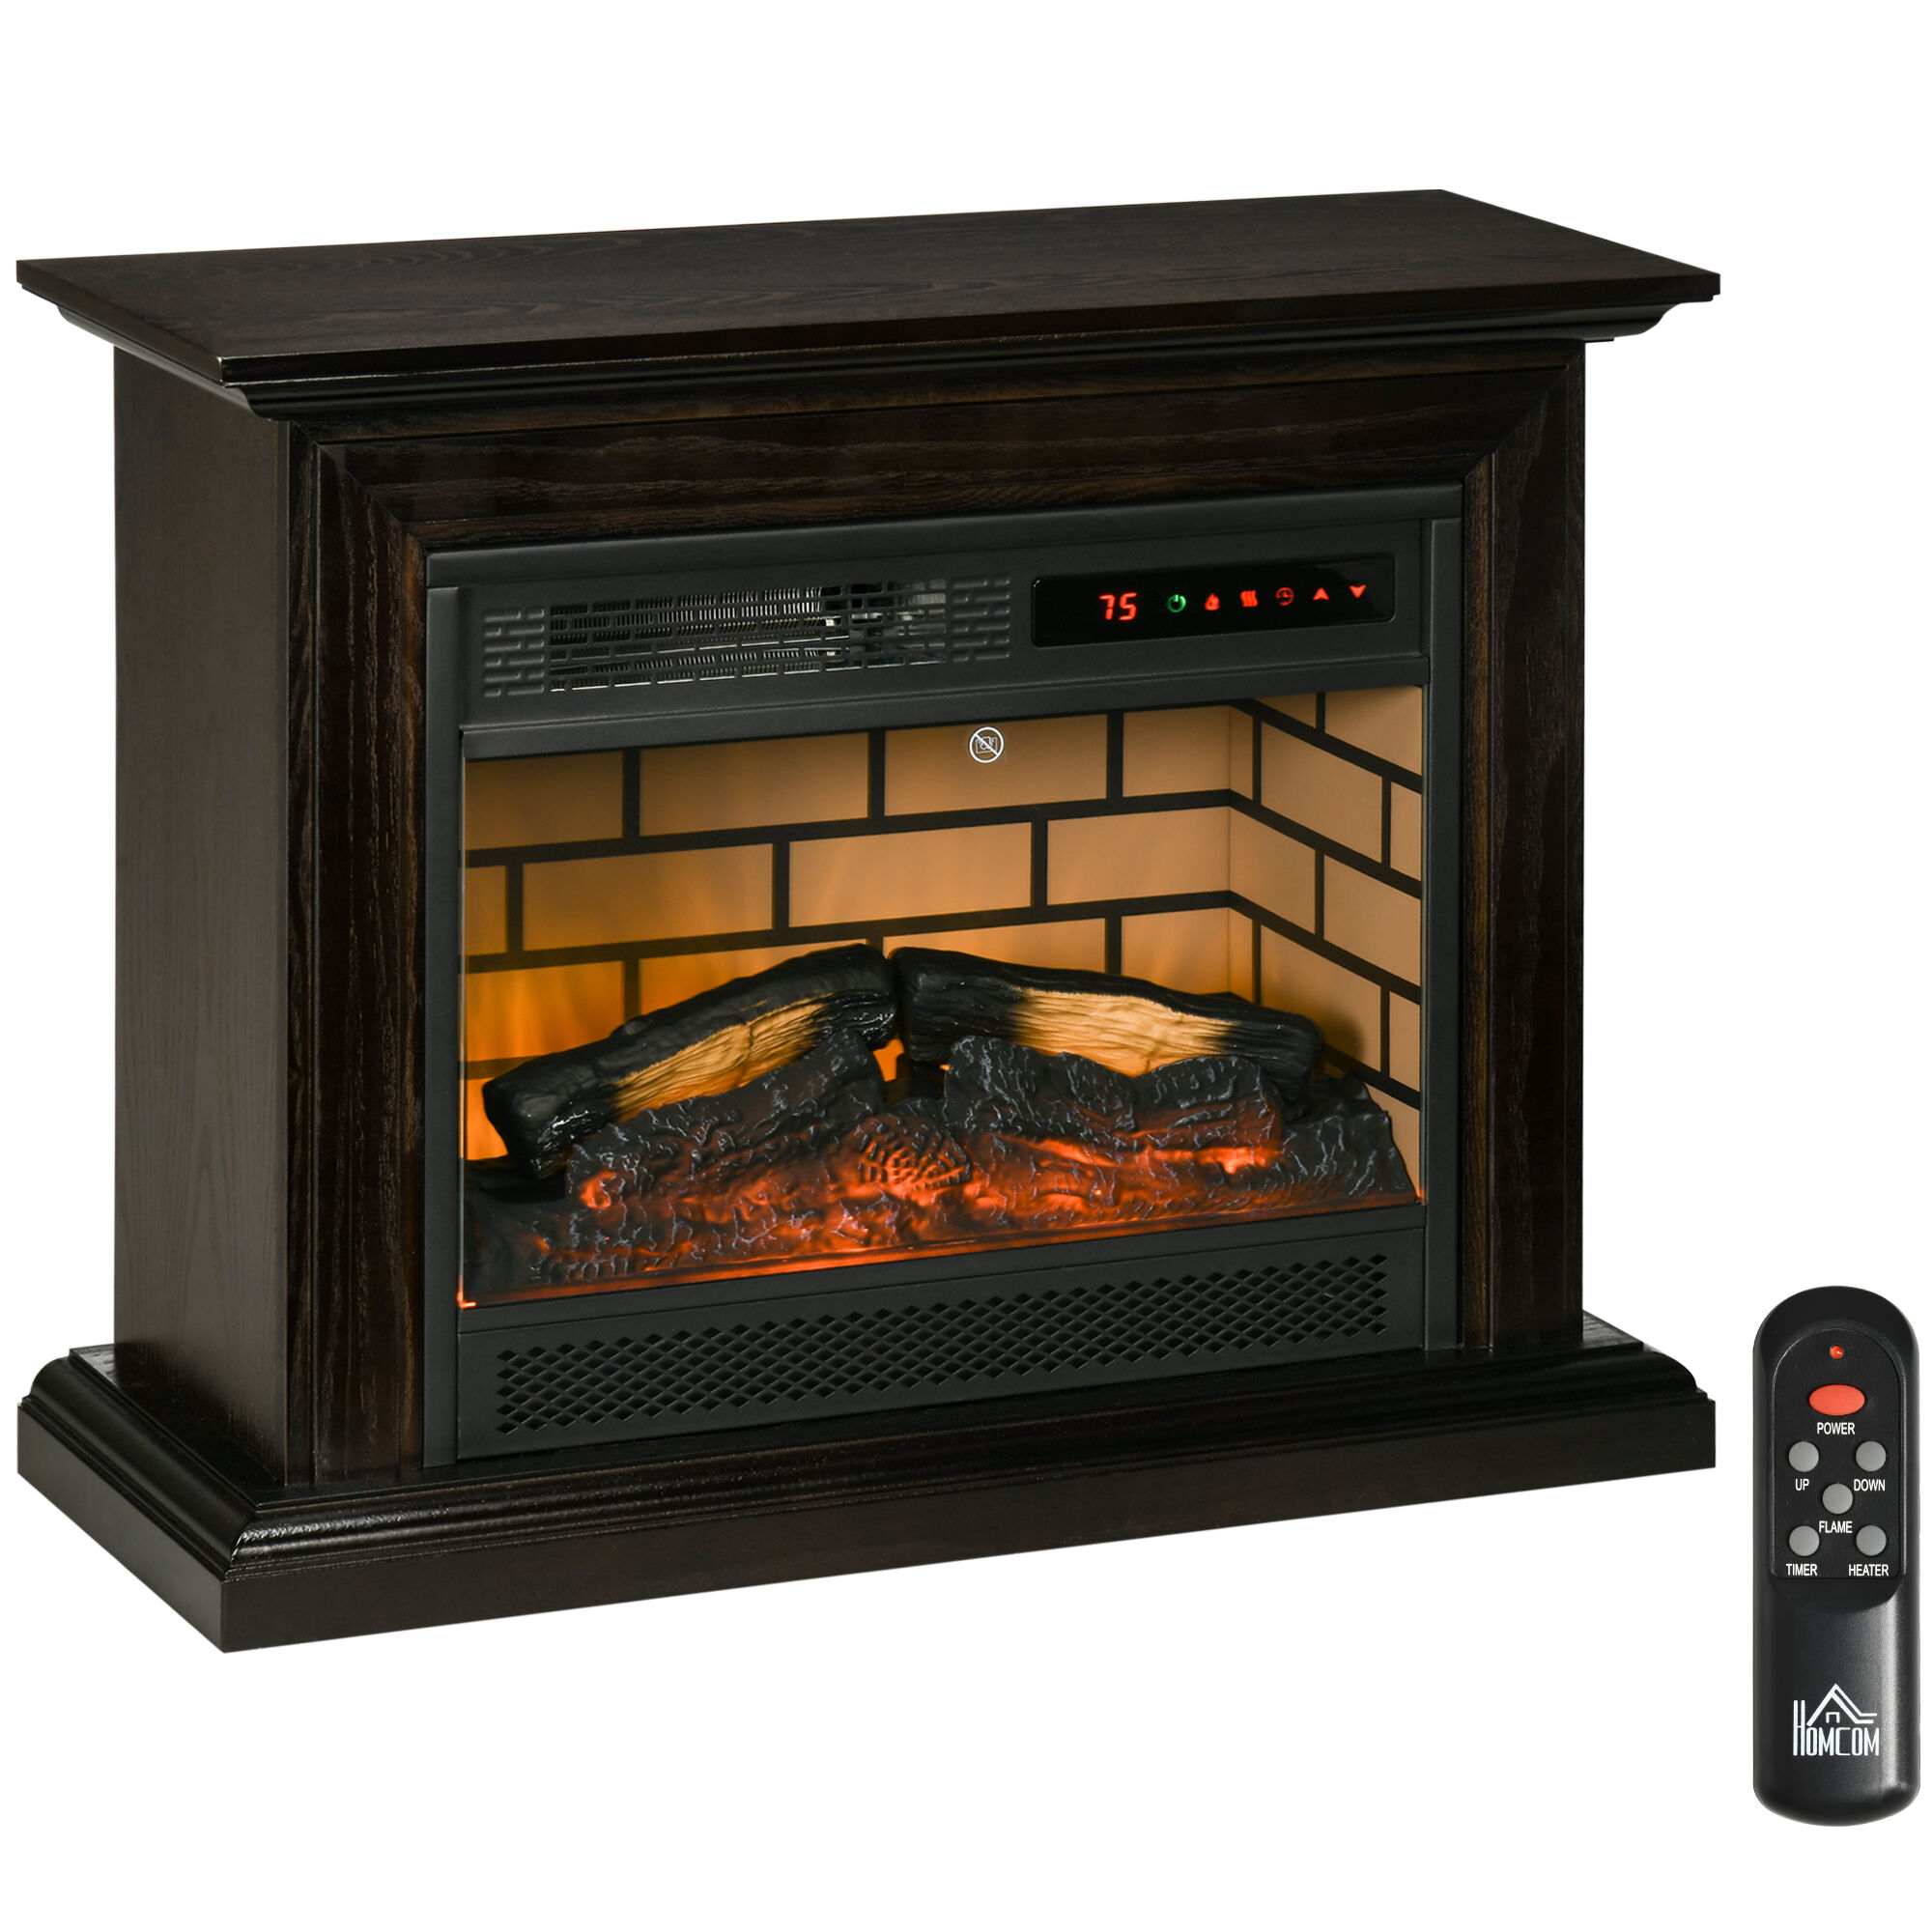 HOMCOM 31" Electric Fireplace with Dimmable Flame Effect and Mantel, Free Standing Electric Fireplace with Log Hearth and Remote Control, 1400W, Brown